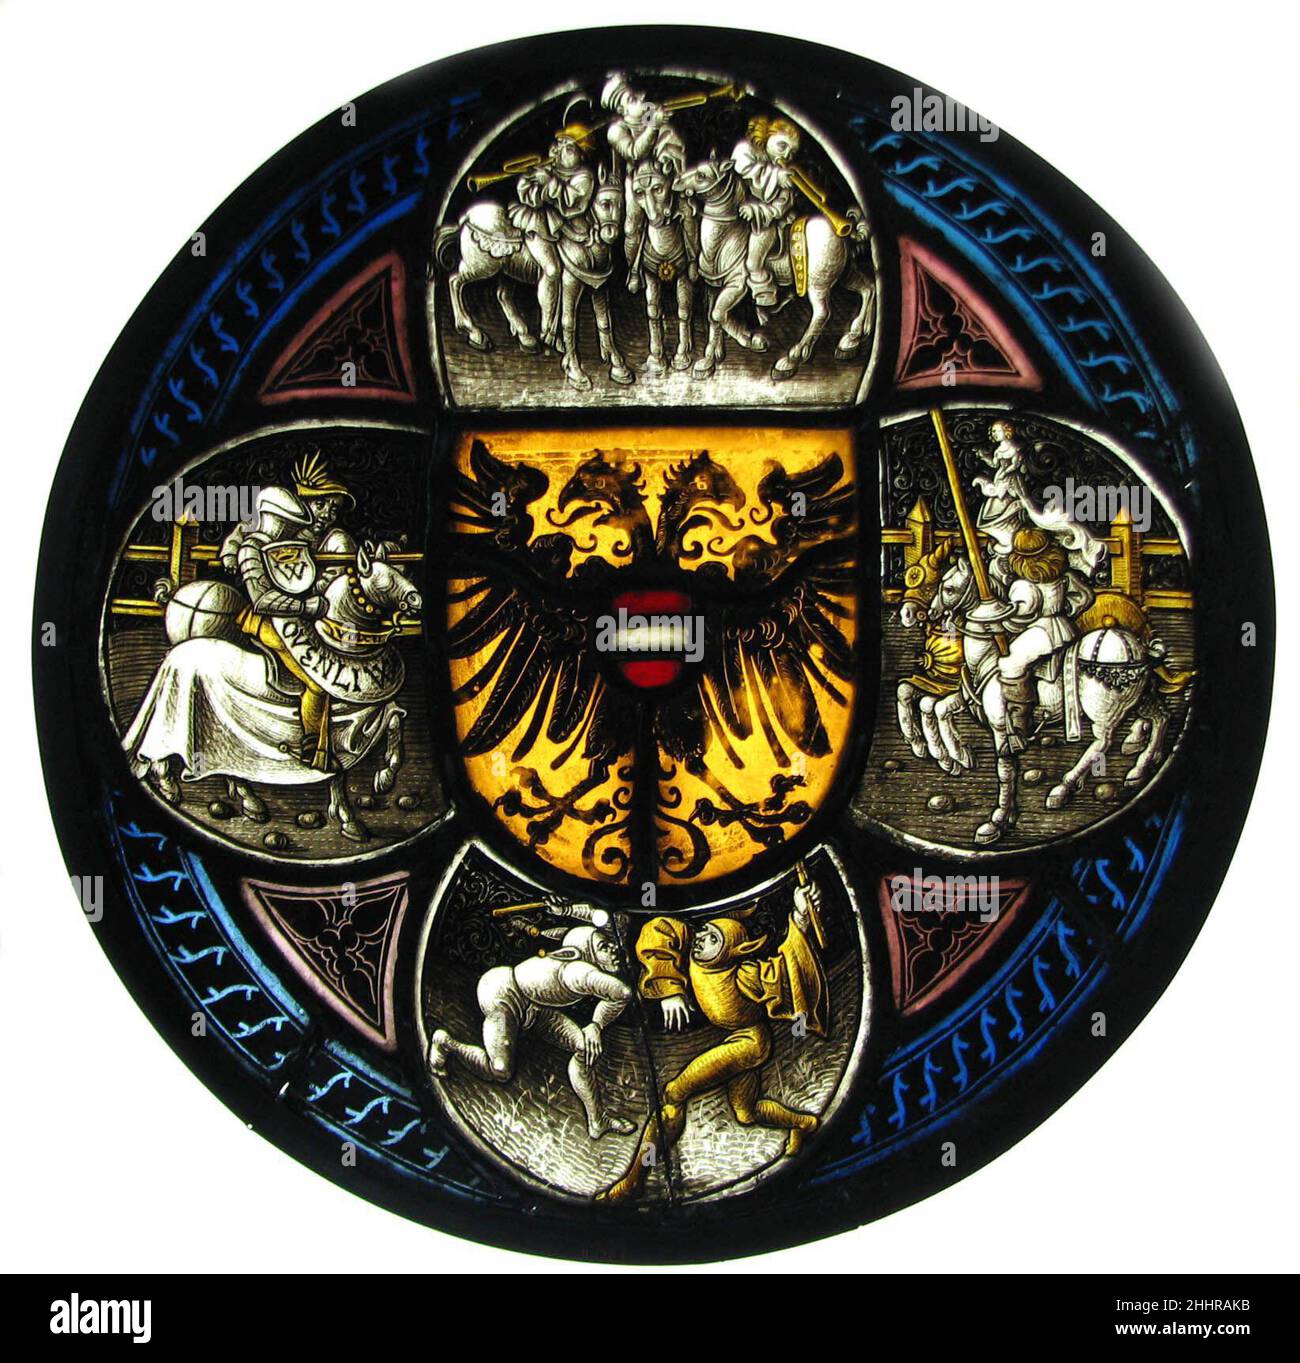 Quatrefoil Roundel with Arms and Secular Scenes 1490–1500 German In the center of this panel are the imperial arms of Austria. The scenes in the quatrefoil represent a variety of secular vignettes. These scenes may signify a tournament masquerade of the type held in Nuremberg before Lent, which would explain the presence of fools, feasts, and lovers. Such imagery was understood as social satire in late medieval art. The number of similar quatrefoil panels that have survived suggests considerable popularity. The origin of the designs is uncertain, but many copies and variations were made in sev Stock Photo